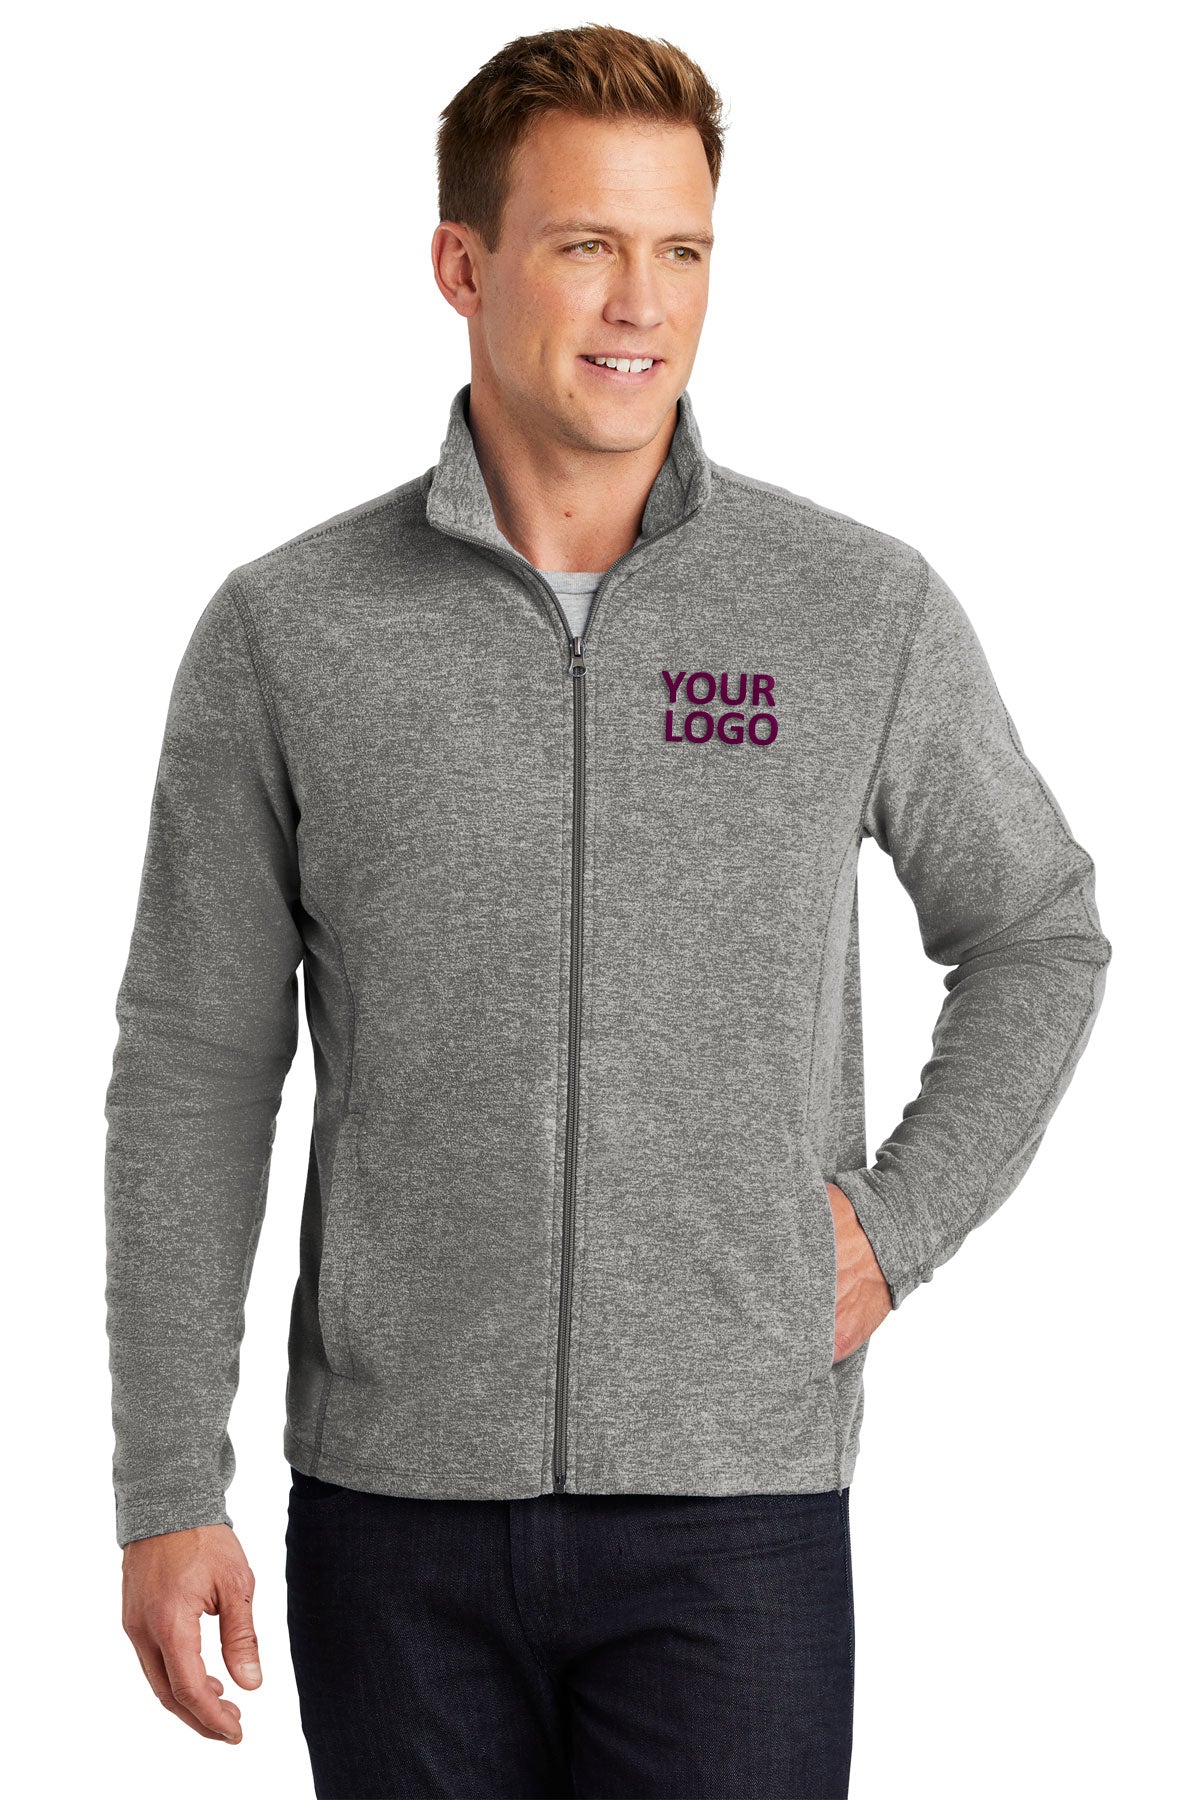 port authority pearl grey heather f235 embroidered jackets for business